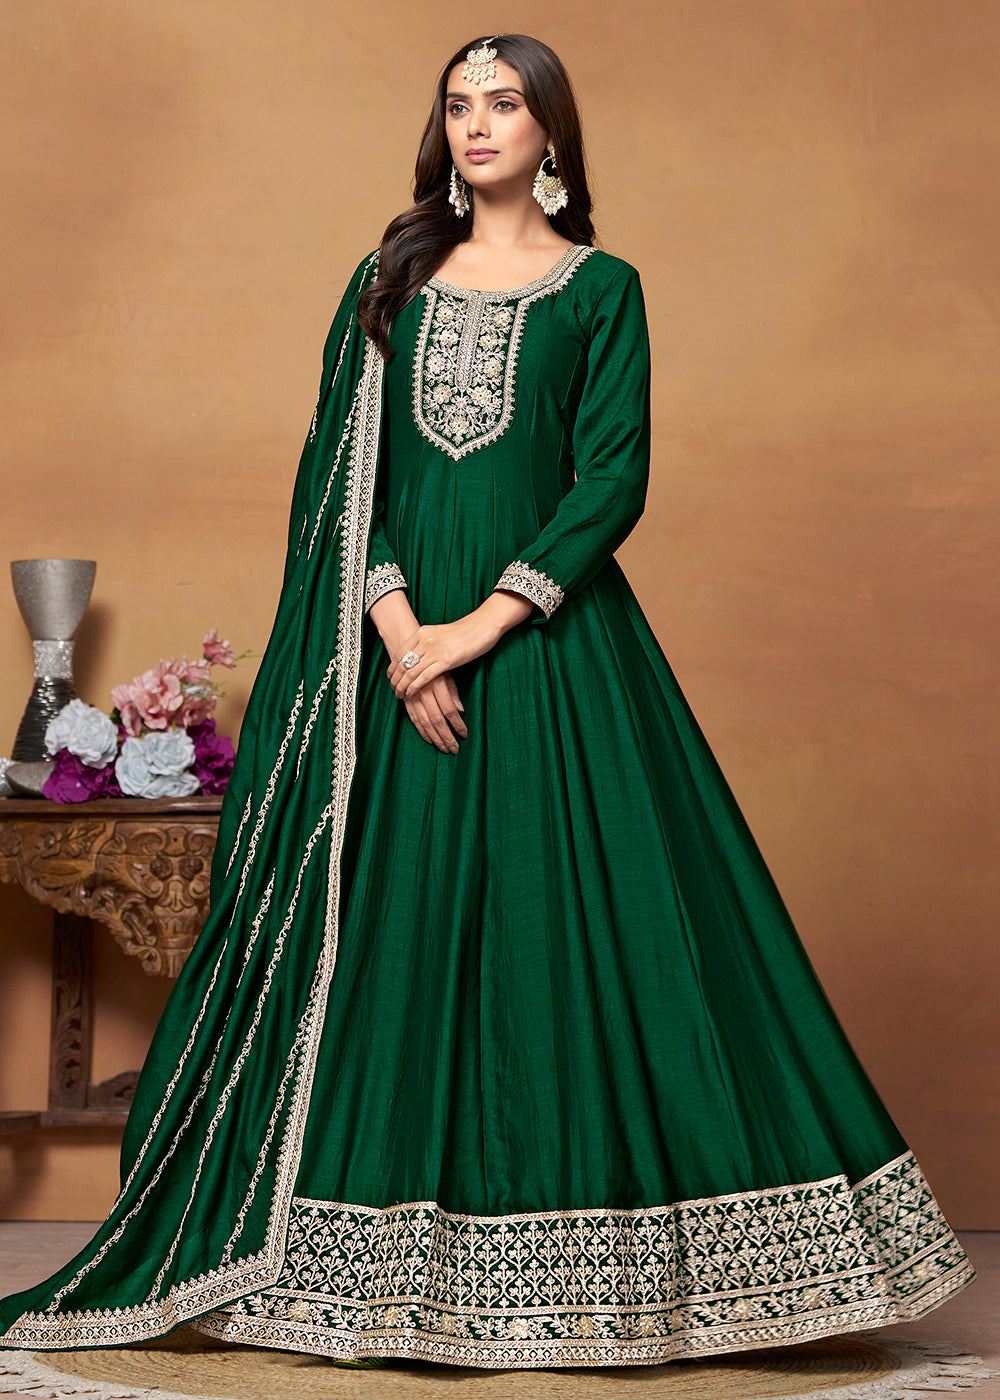 Buy Now Amazing Art Silk Green Embroidered Festive Anarkali Suit Online in USA, UK, Australia, New Zealand, Canada & Worldwide at Empress Clothing.